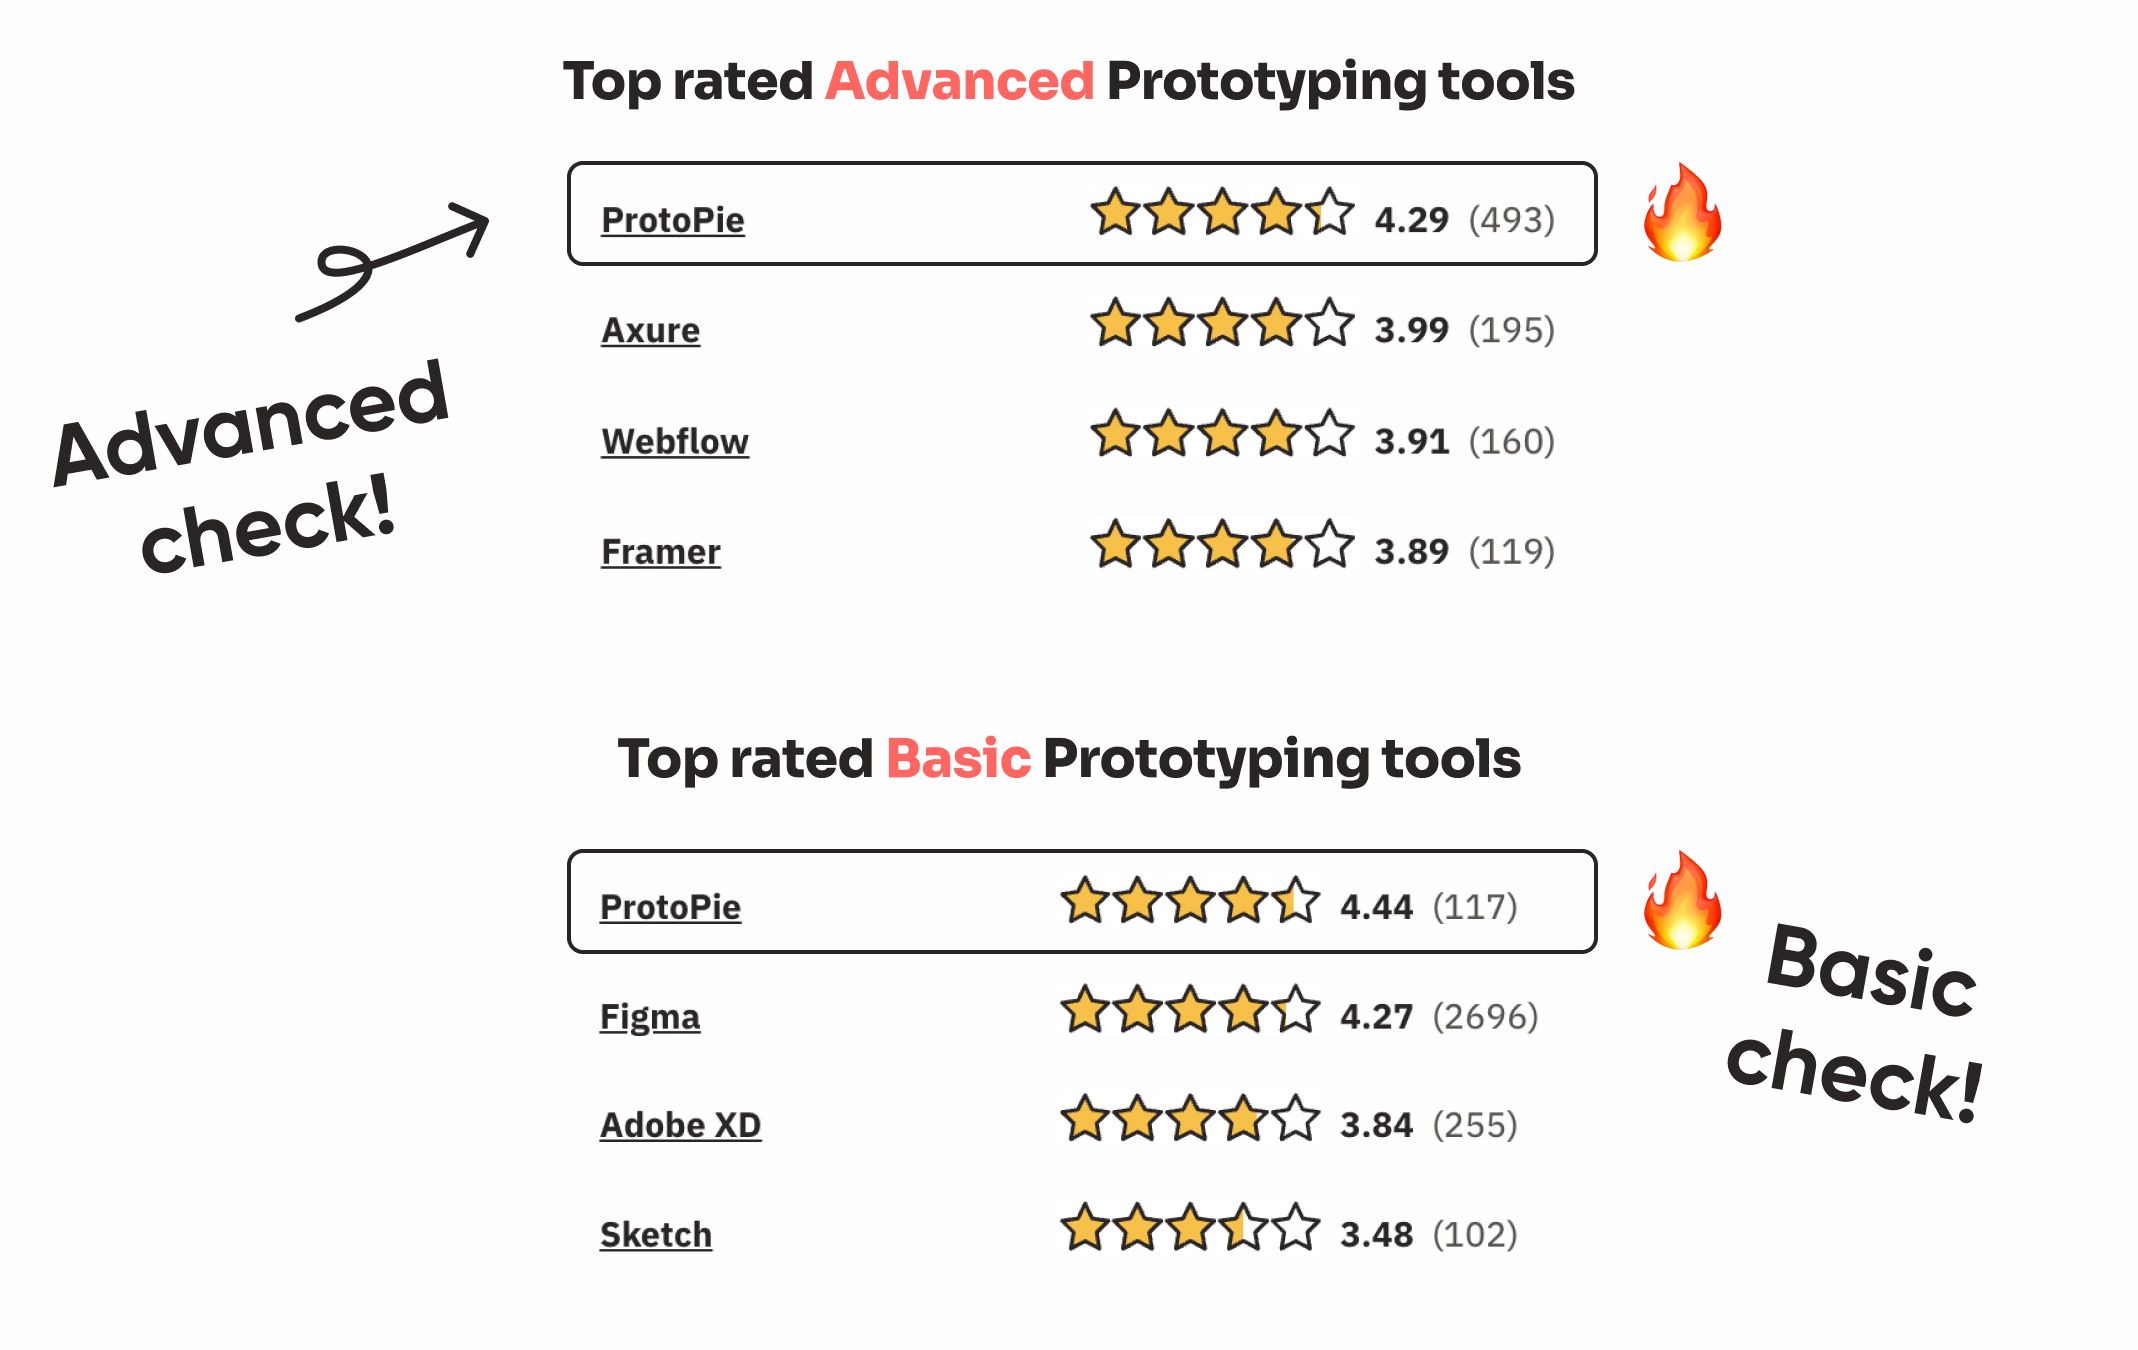 Top rated advanced prototyping tools